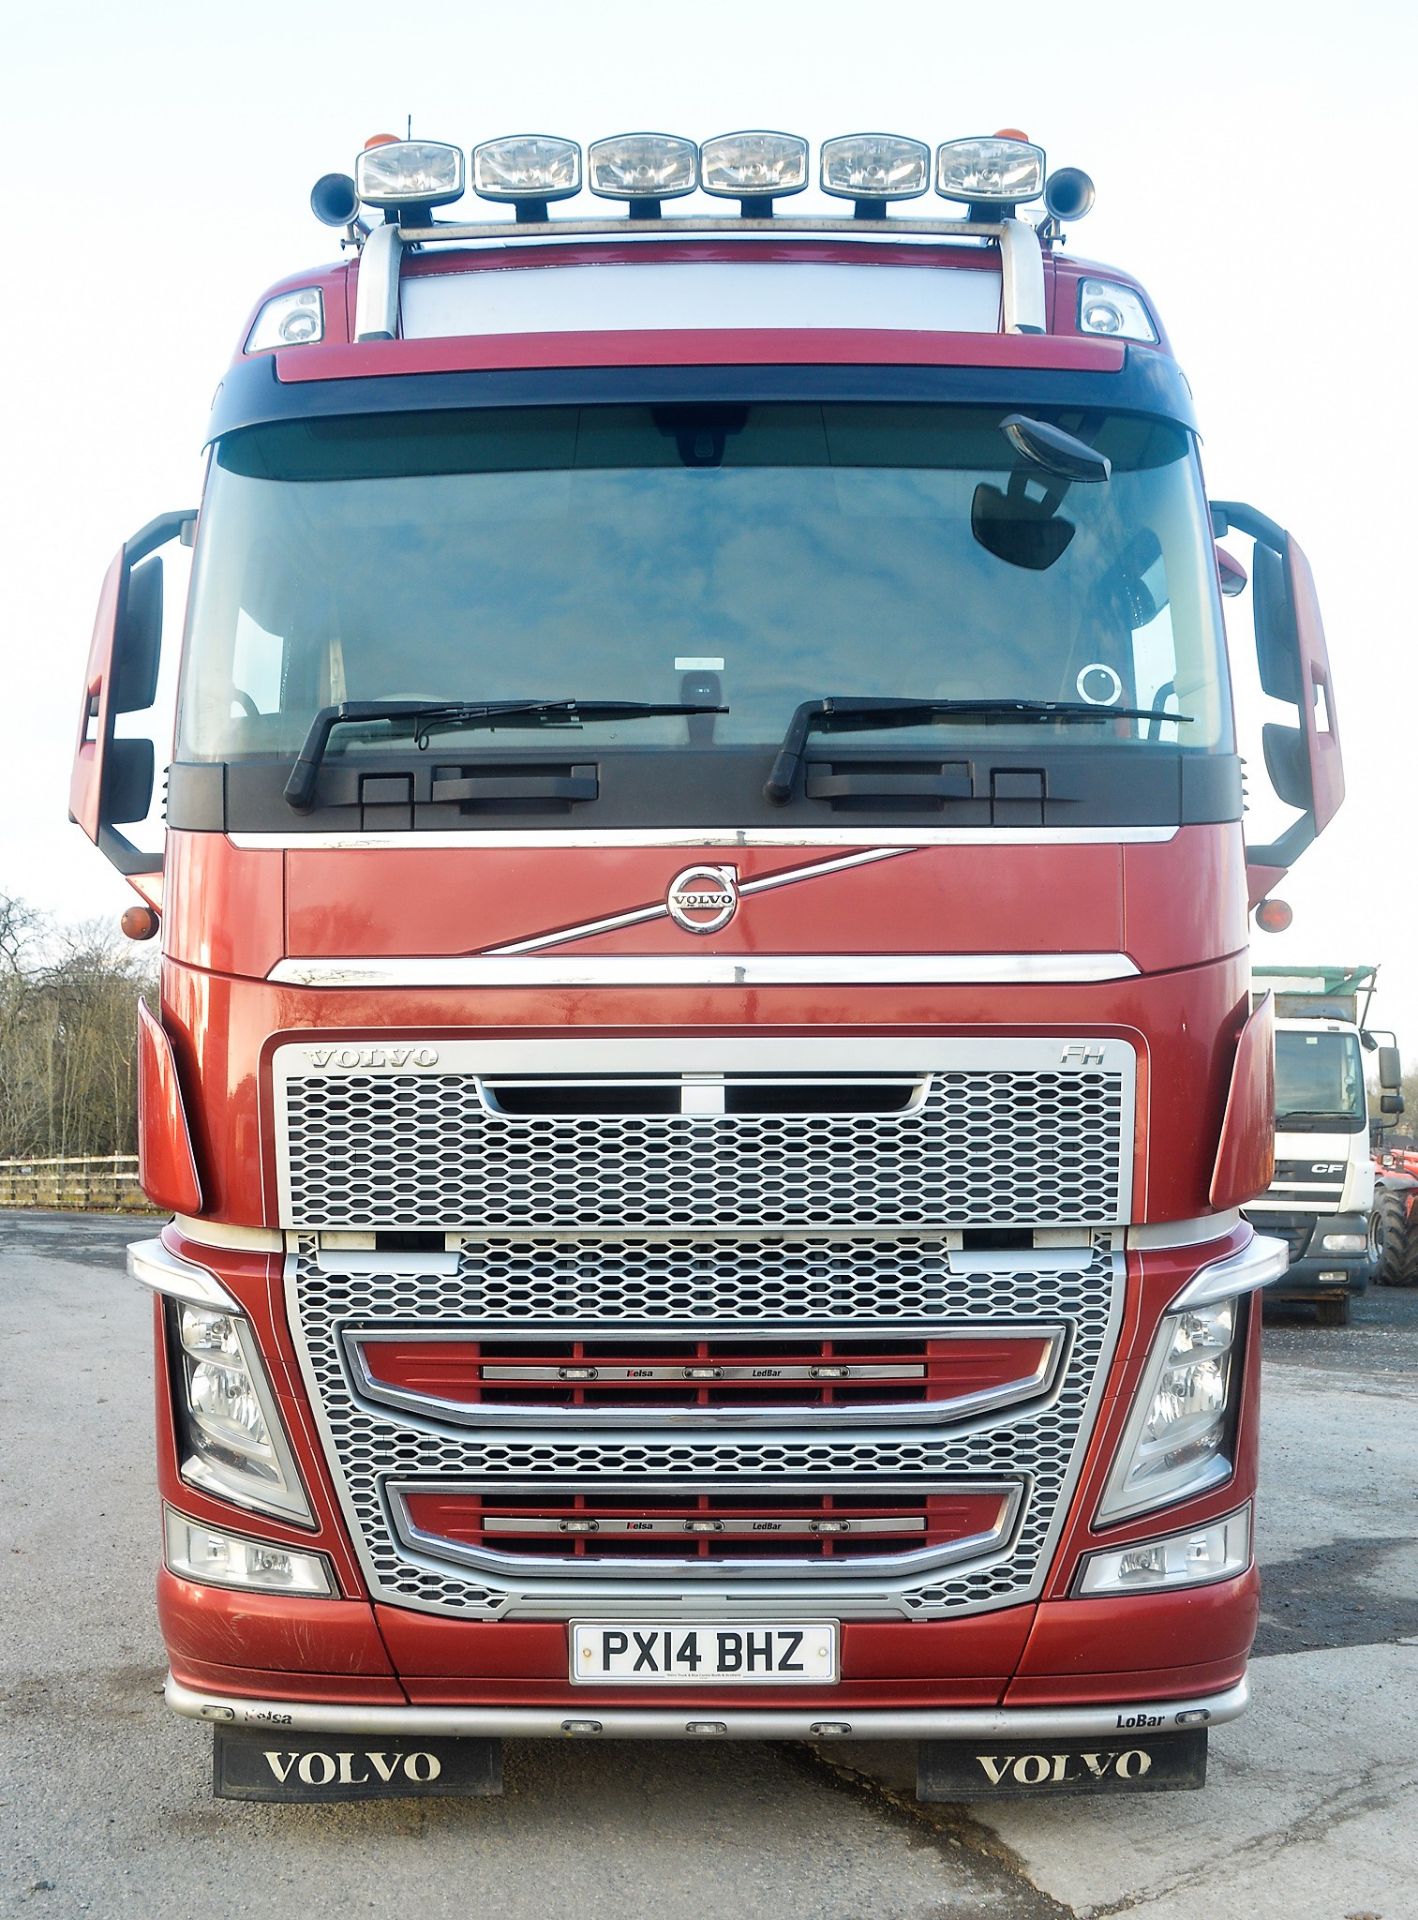 Volvo FH13 EuroV 500 HP 6 x 2 tractor unit Registration Number: PX14 BHZ Date of Registration: 15/ - Image 5 of 8